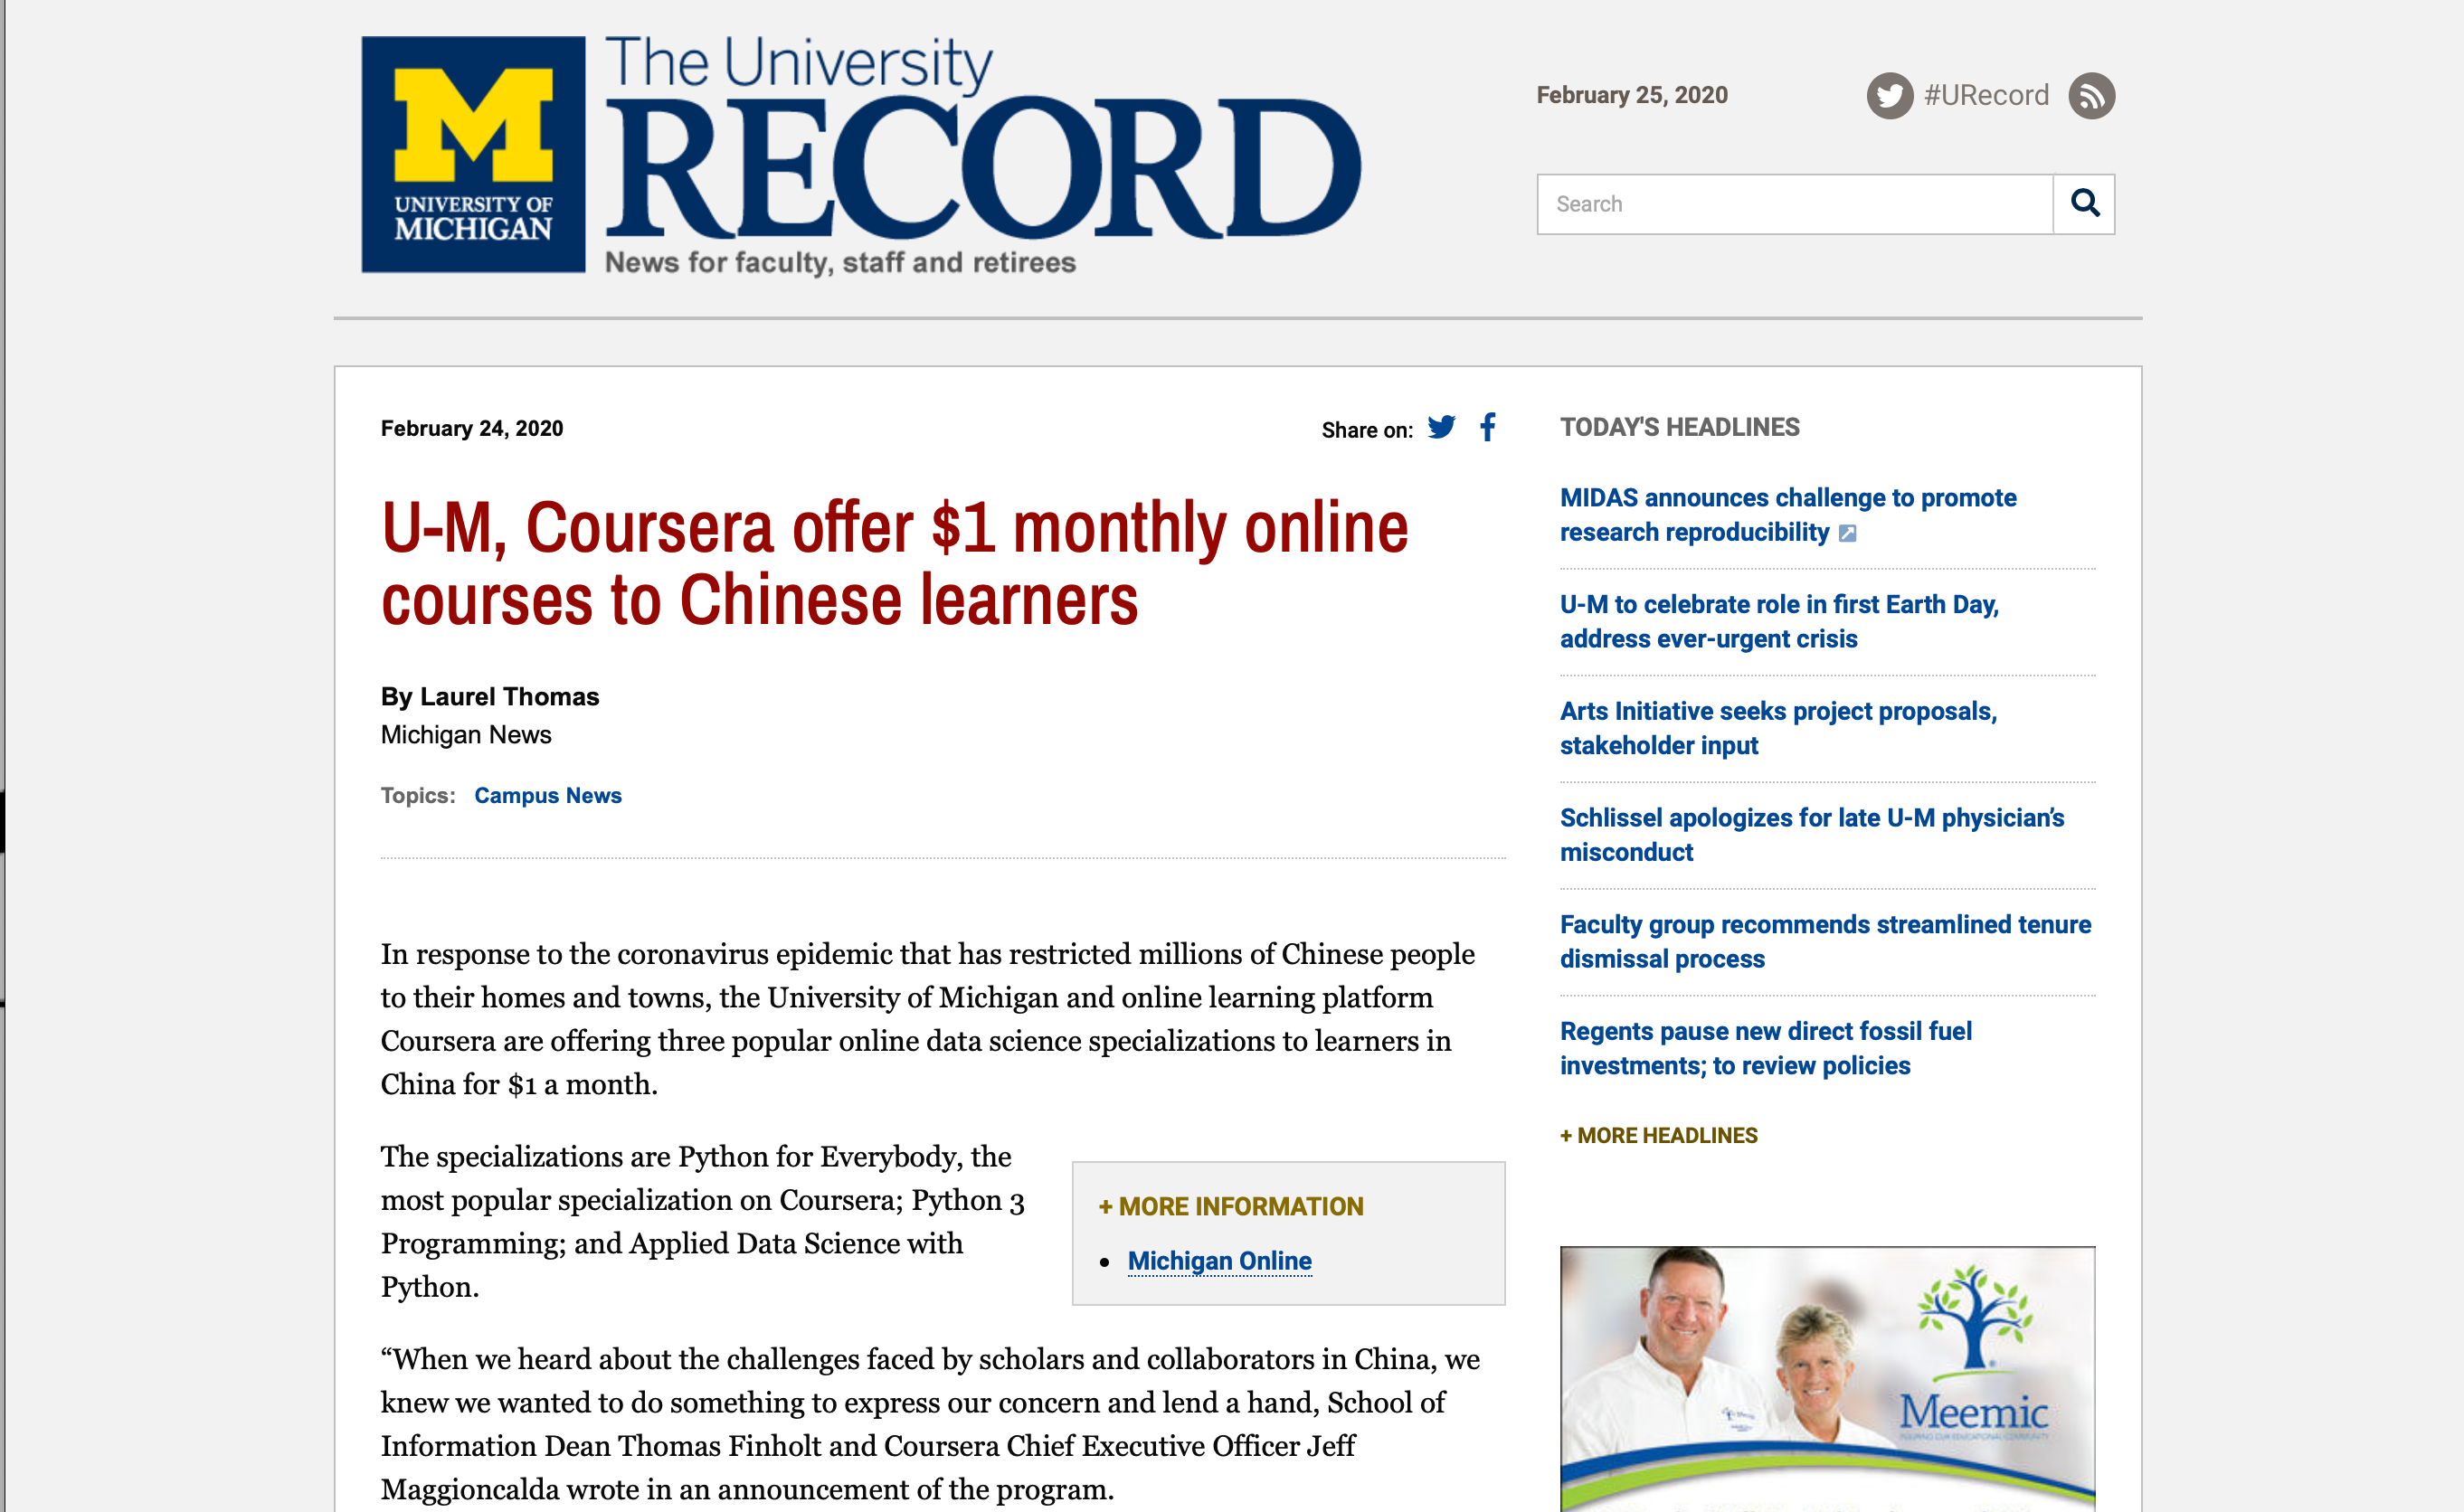 U-M, Coursera offer $1 monthly online courses to Chinese learners